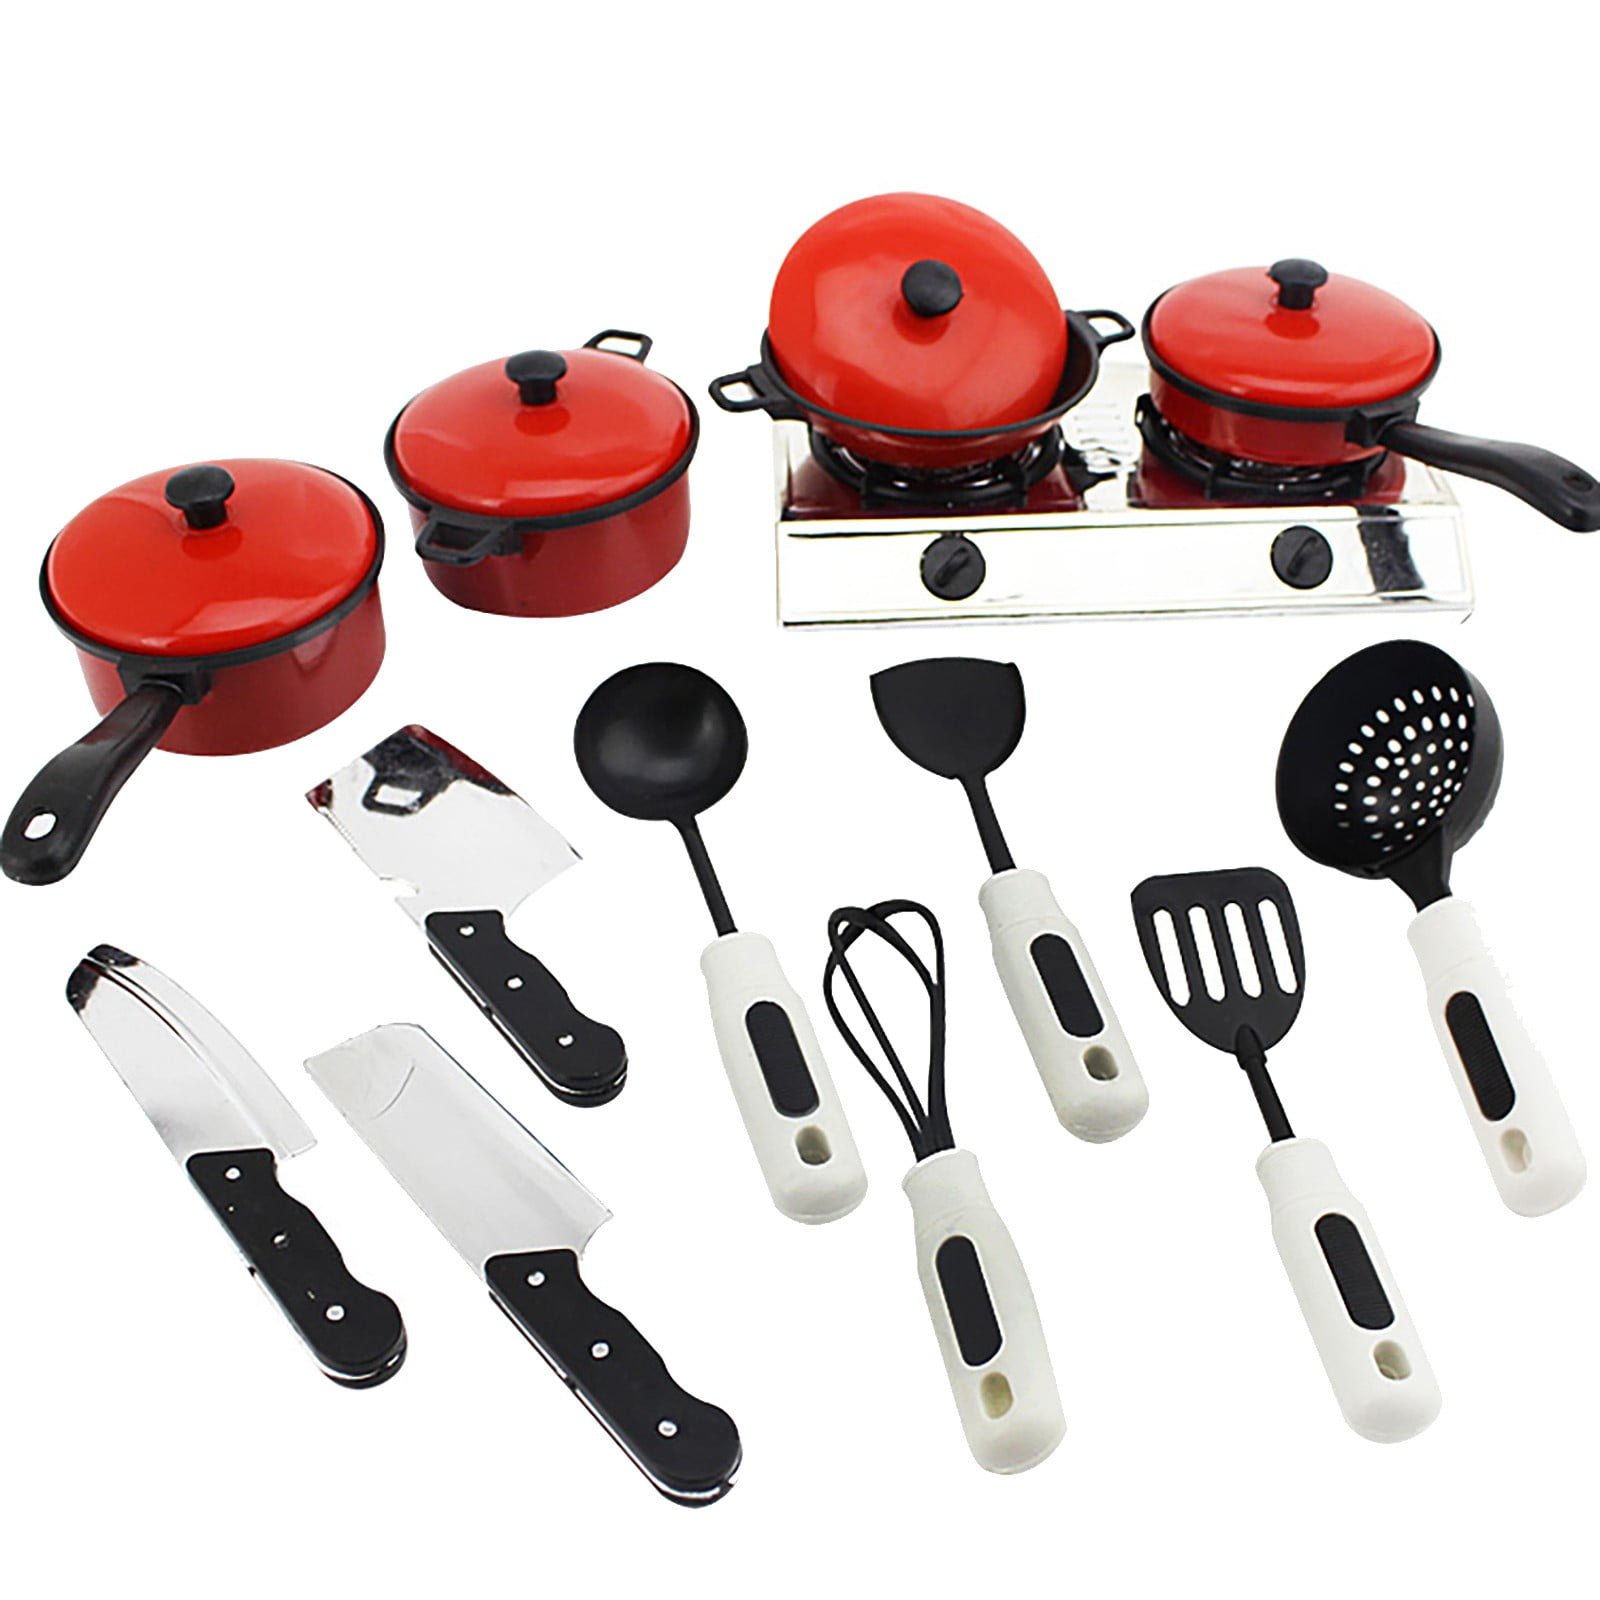 13Pcs Pots and Pans Kitchen Utensils Dishes Cookware For Kid Pretend Play Toy US 